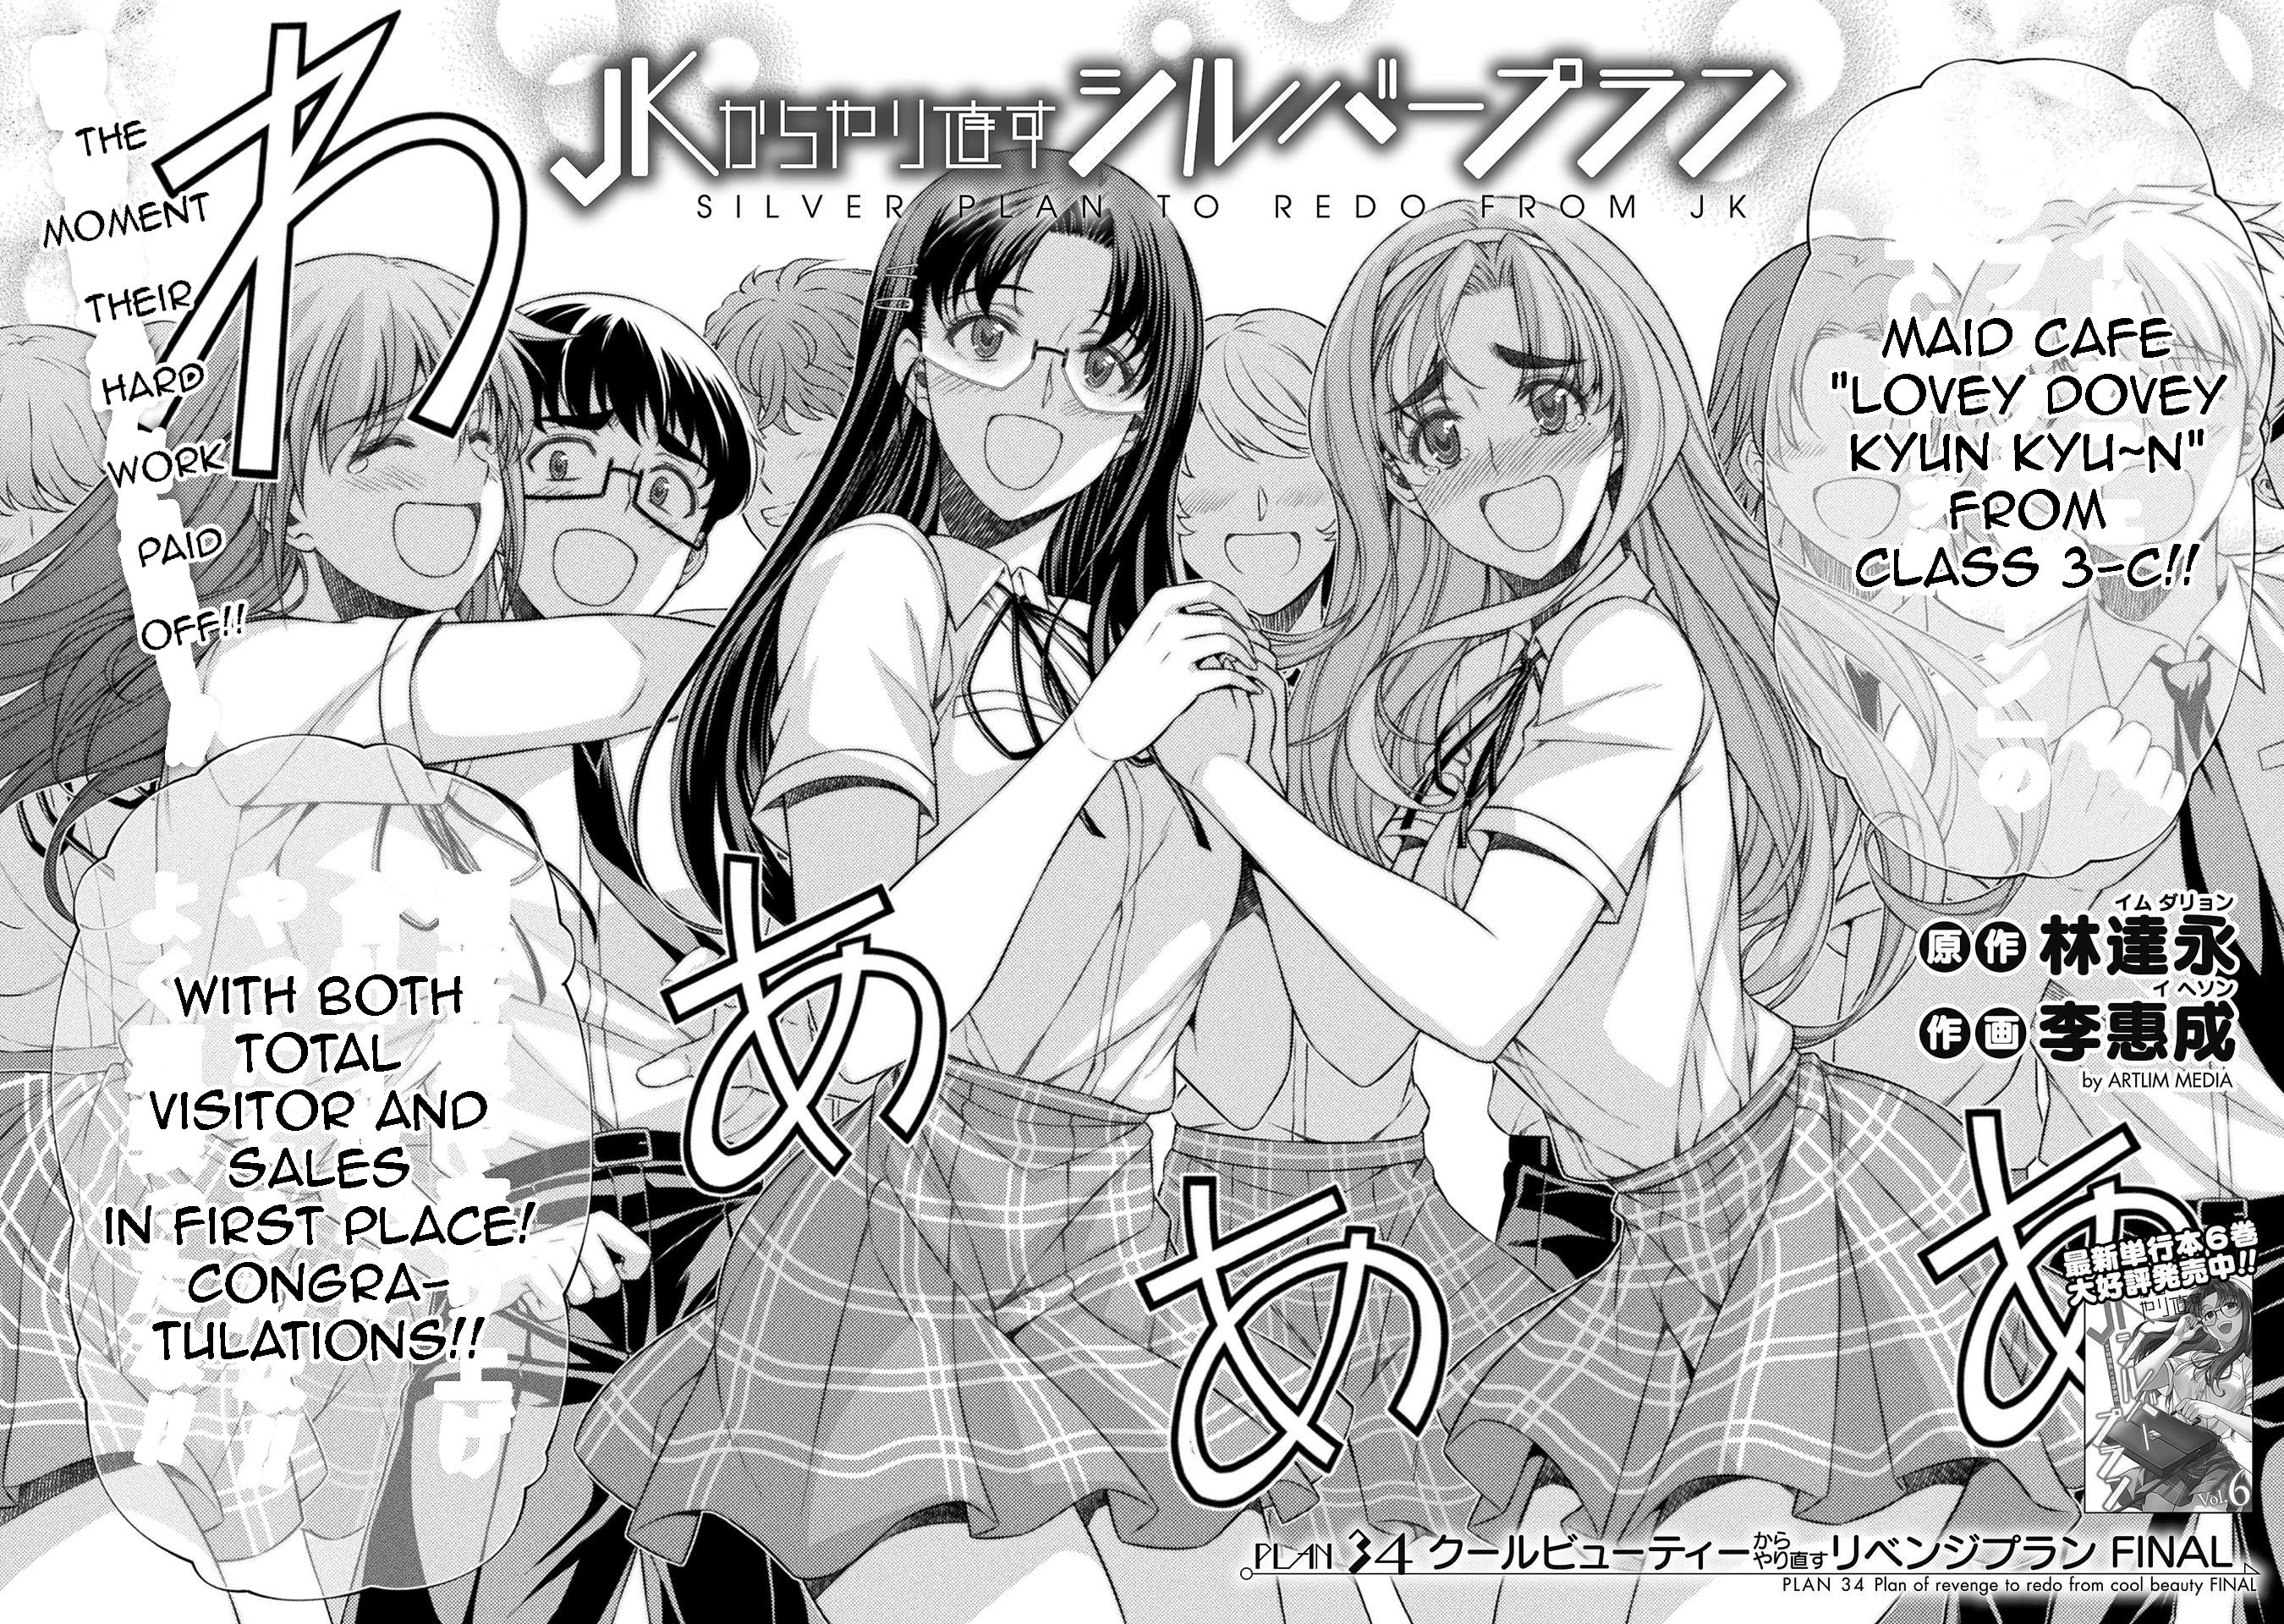 Silver Plan To Redo From Jk Vol.7 Chapter 34: Plan Of Revenge To Redo From Cool Beauty Final - Picture 2